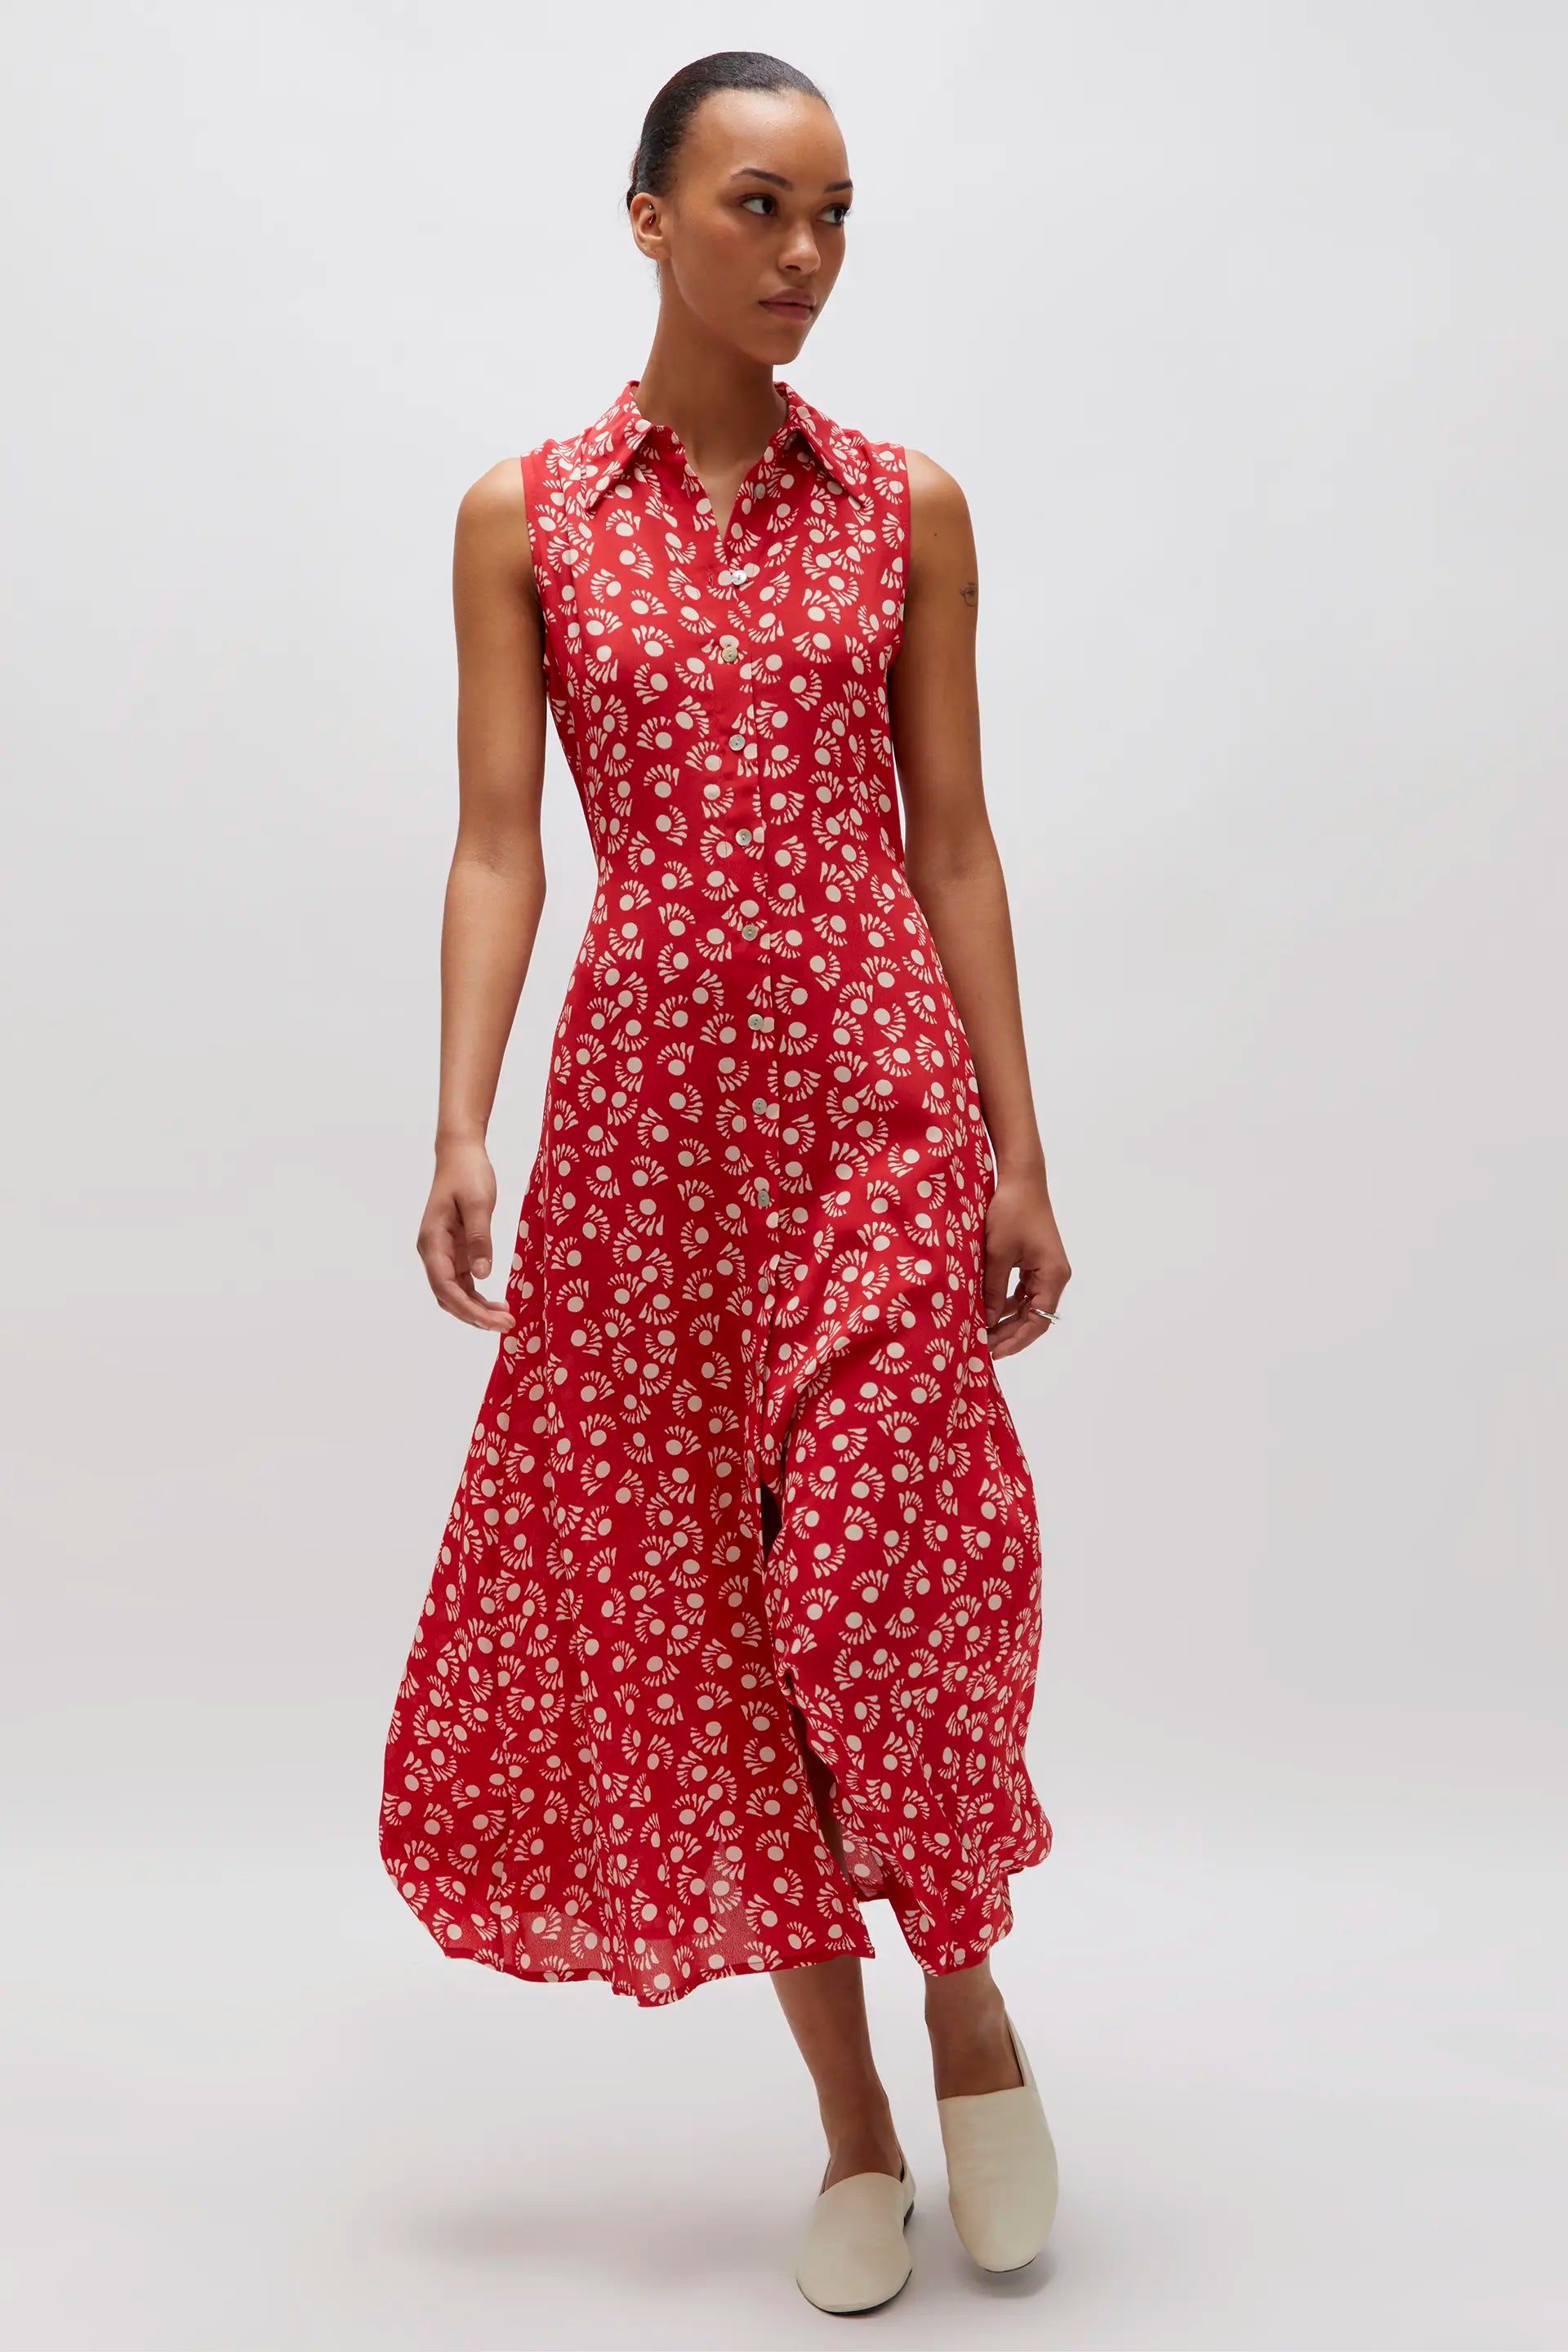 Wild Pony Mars Red printed long dress - clever alice